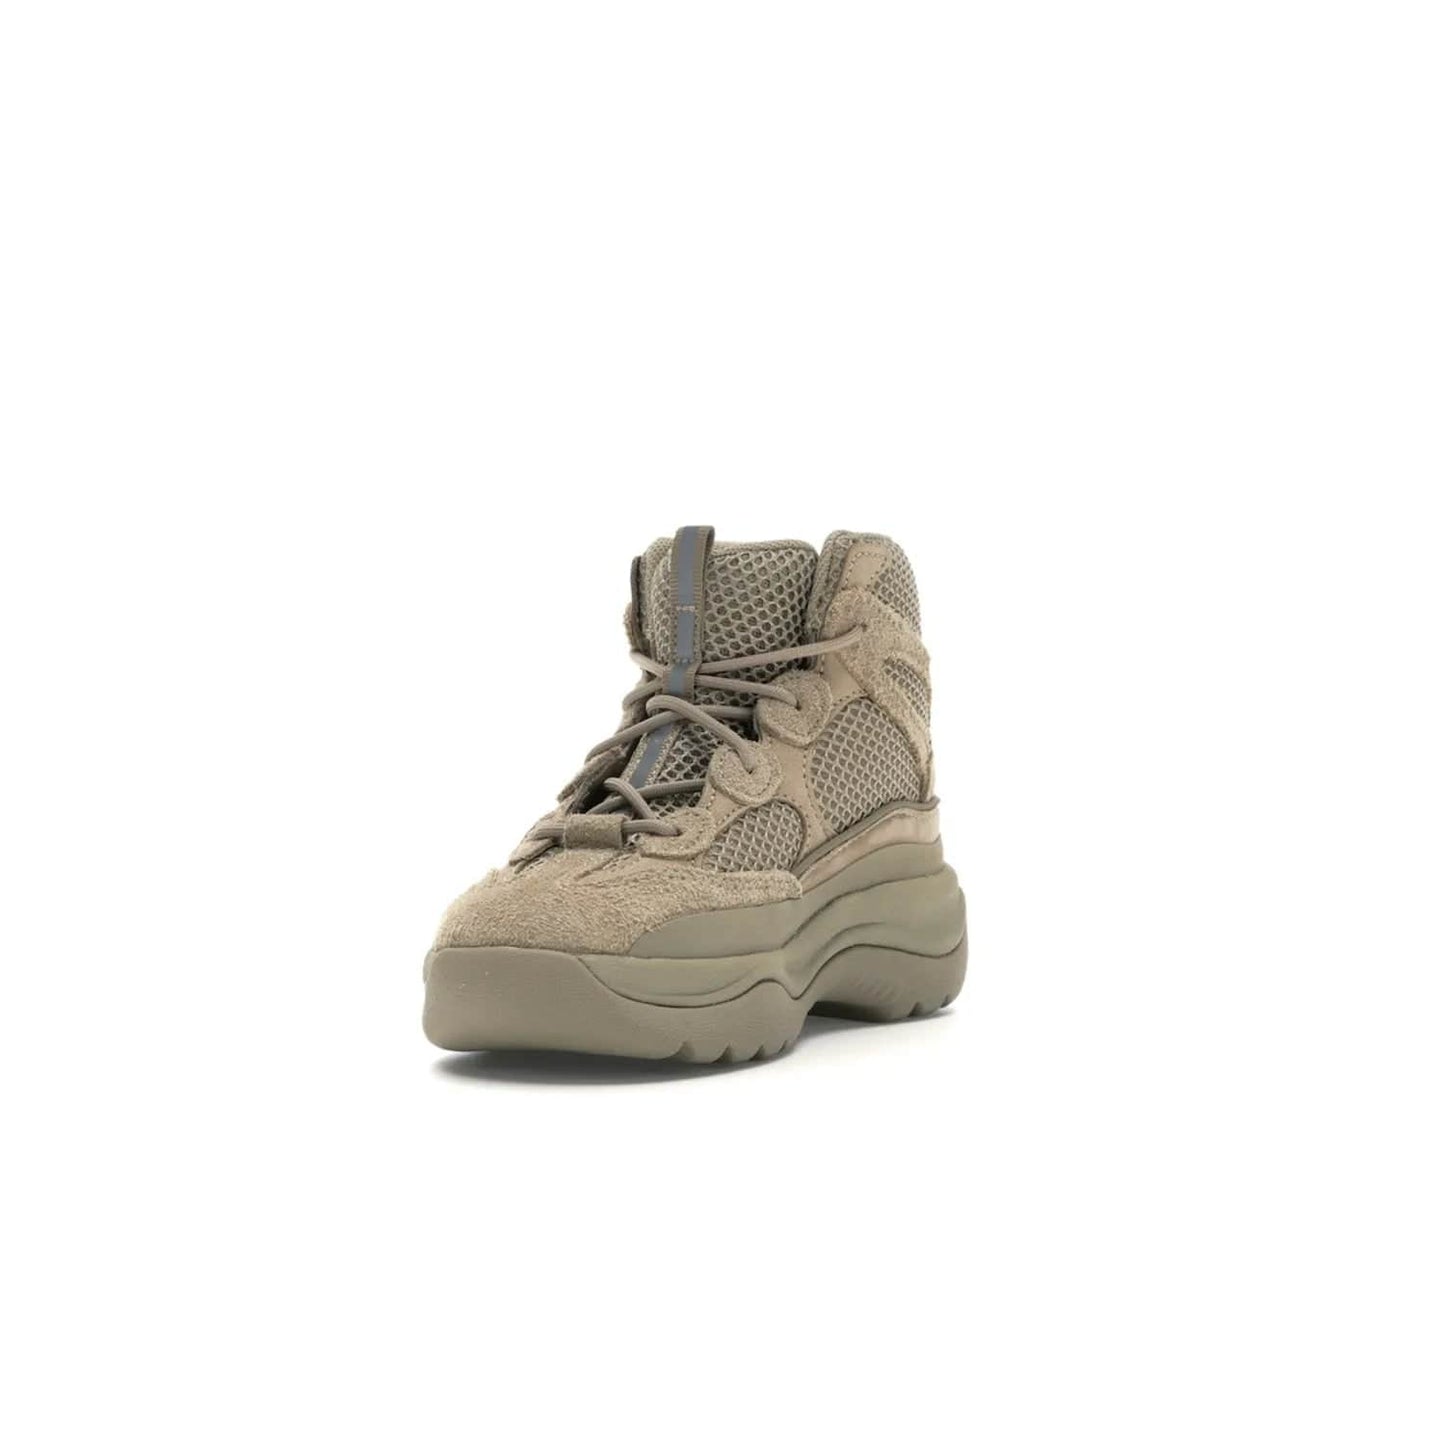 adidas Yeezy Desert Boot Rock (Kids) - Image 13 - Only at www.BallersClubKickz.com - Elevate your style this season with the adidas Yeezy Desert Boot Rock. Crafted from layered nylon and suede, this chic kids' silhouette features an EVA midsole and rubber outsole for superior cushioning and traction.